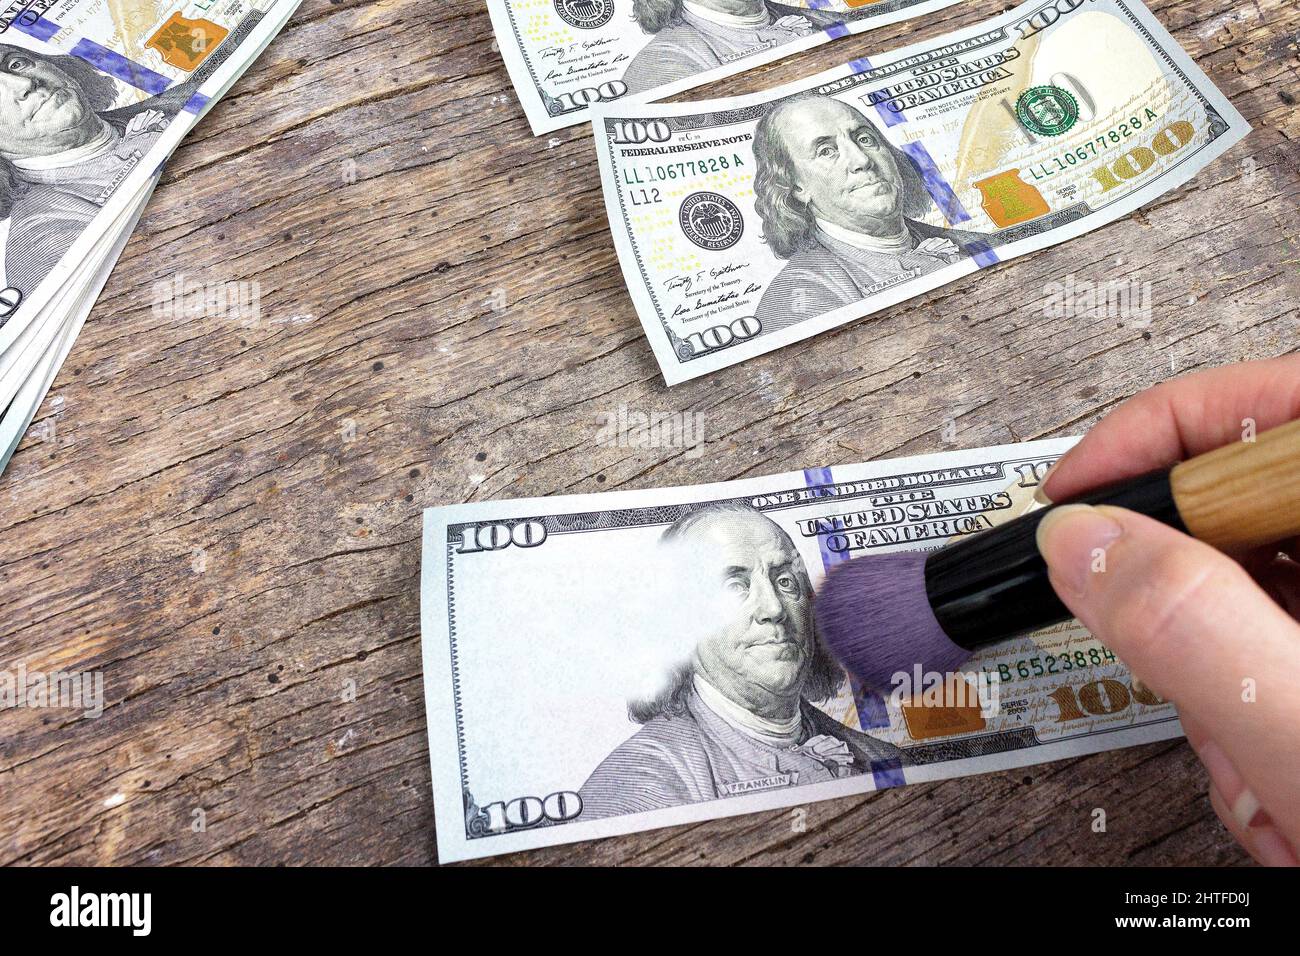 Process make of counterfeit money, Illegal production of US dollars Stock Photo